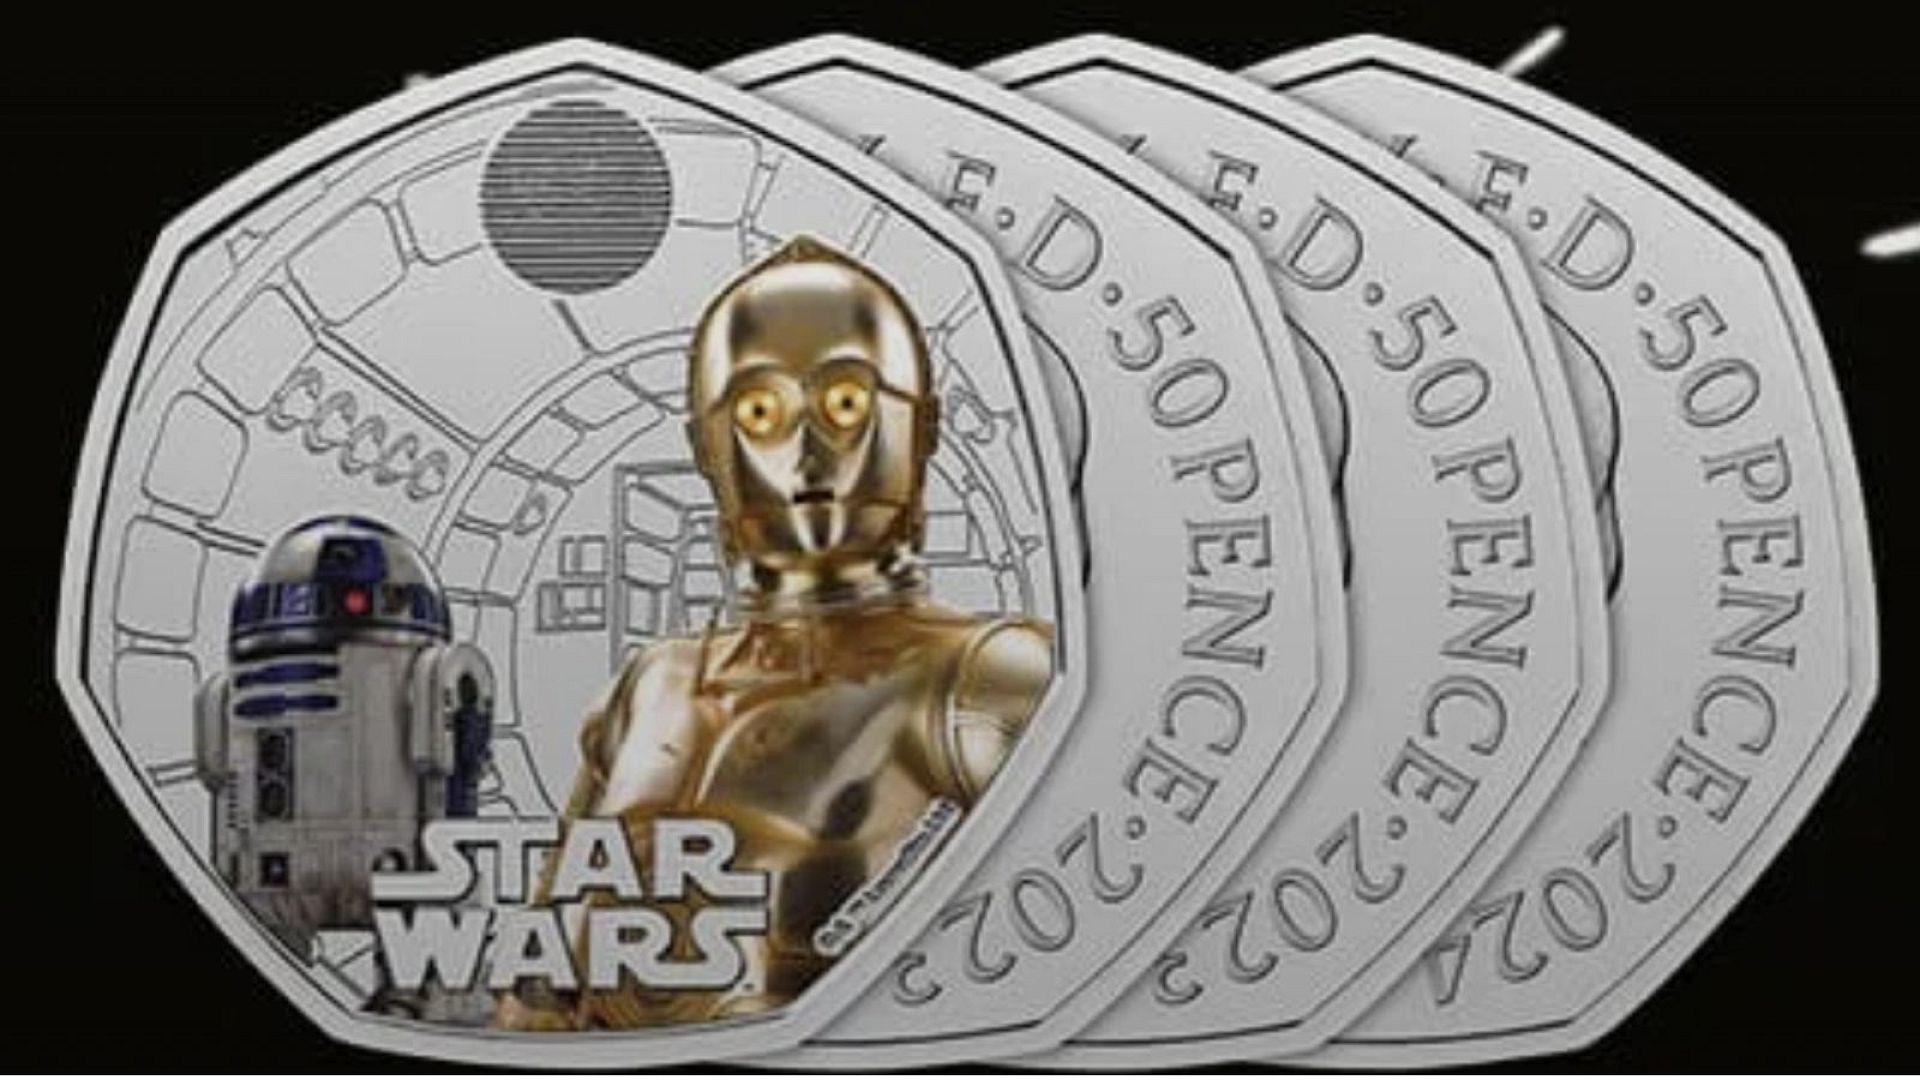 Star Wars coins for 'Return of the Jedi' anniversary unveiled | Euronews